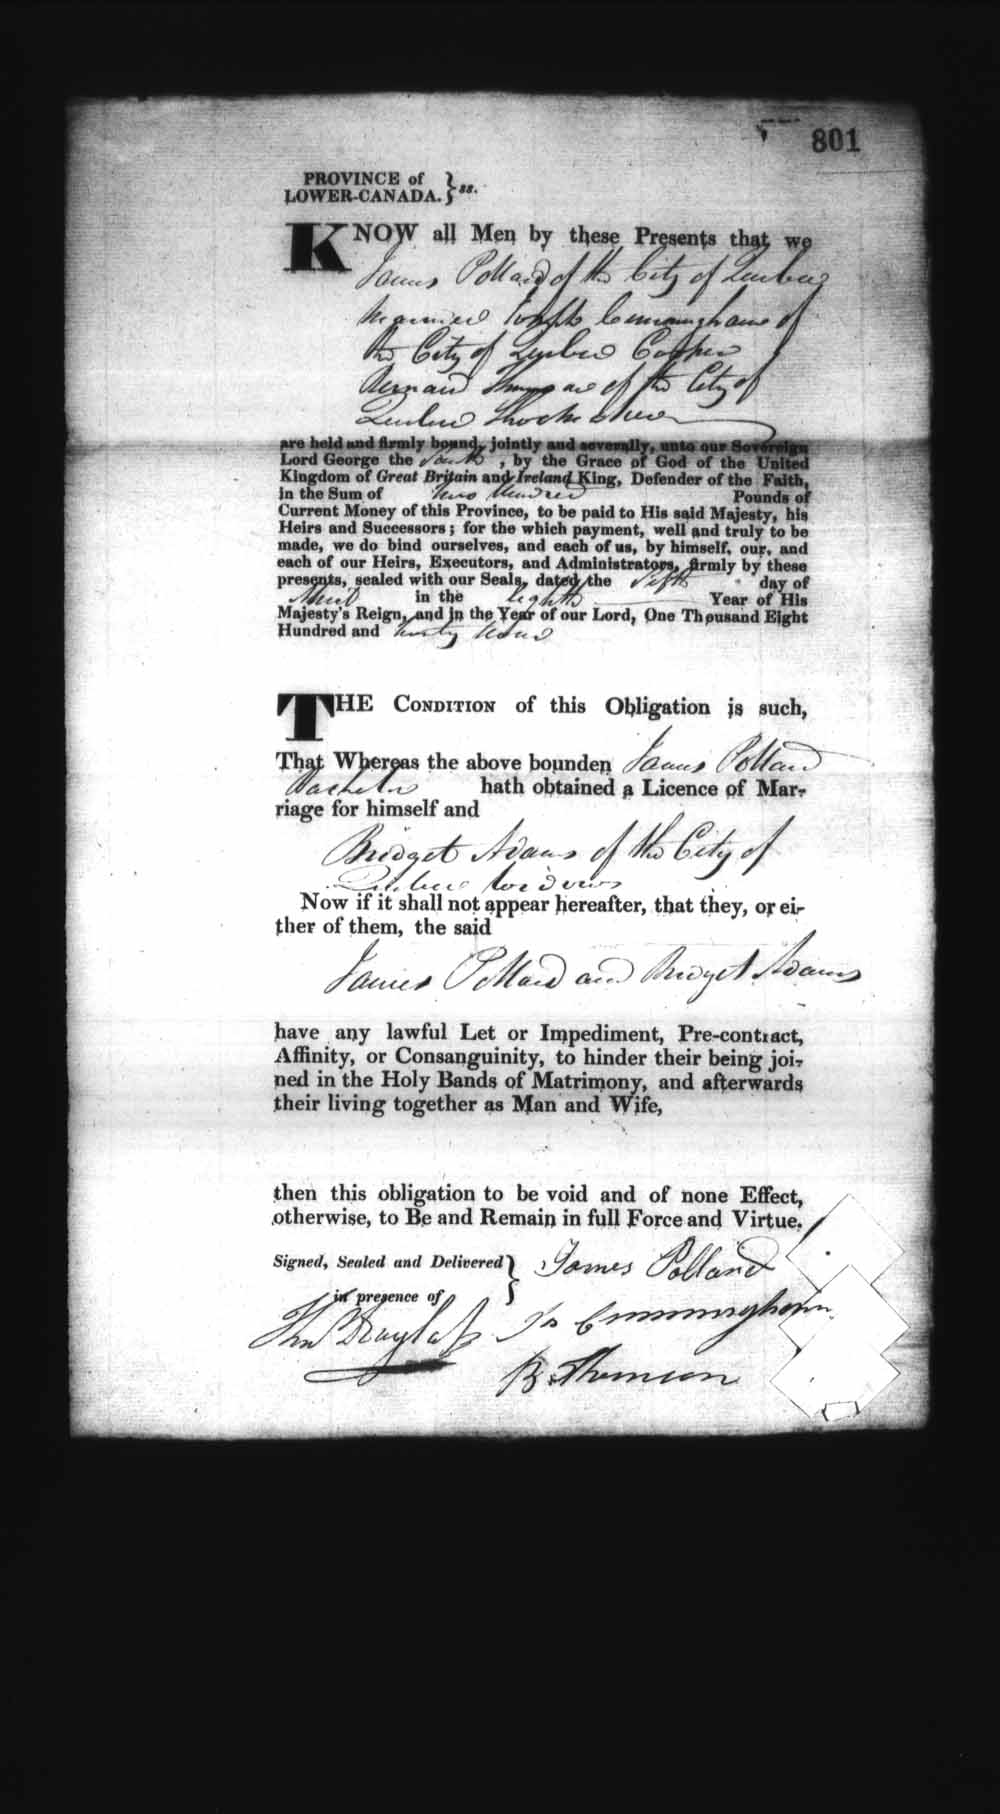 Digitized page of Upper and Lower Canada Marriage Bonds (1779-1865) for Image No.: e008236877